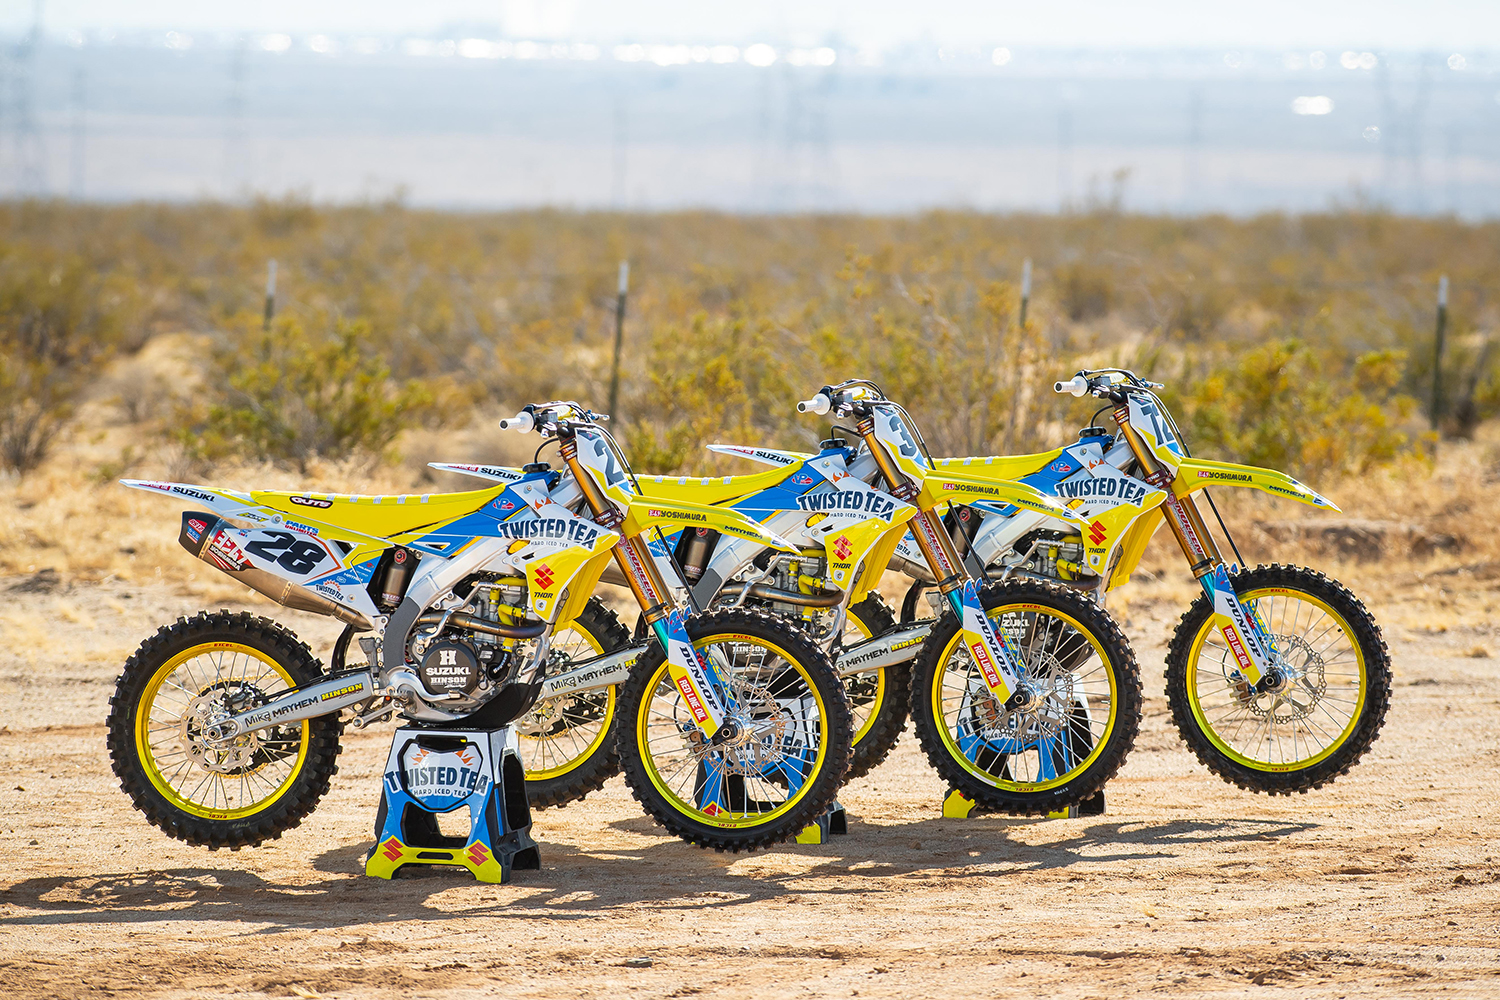 first-look-at-the-twisted-tea-suzuki-factory-racing-team-swapmoto-live